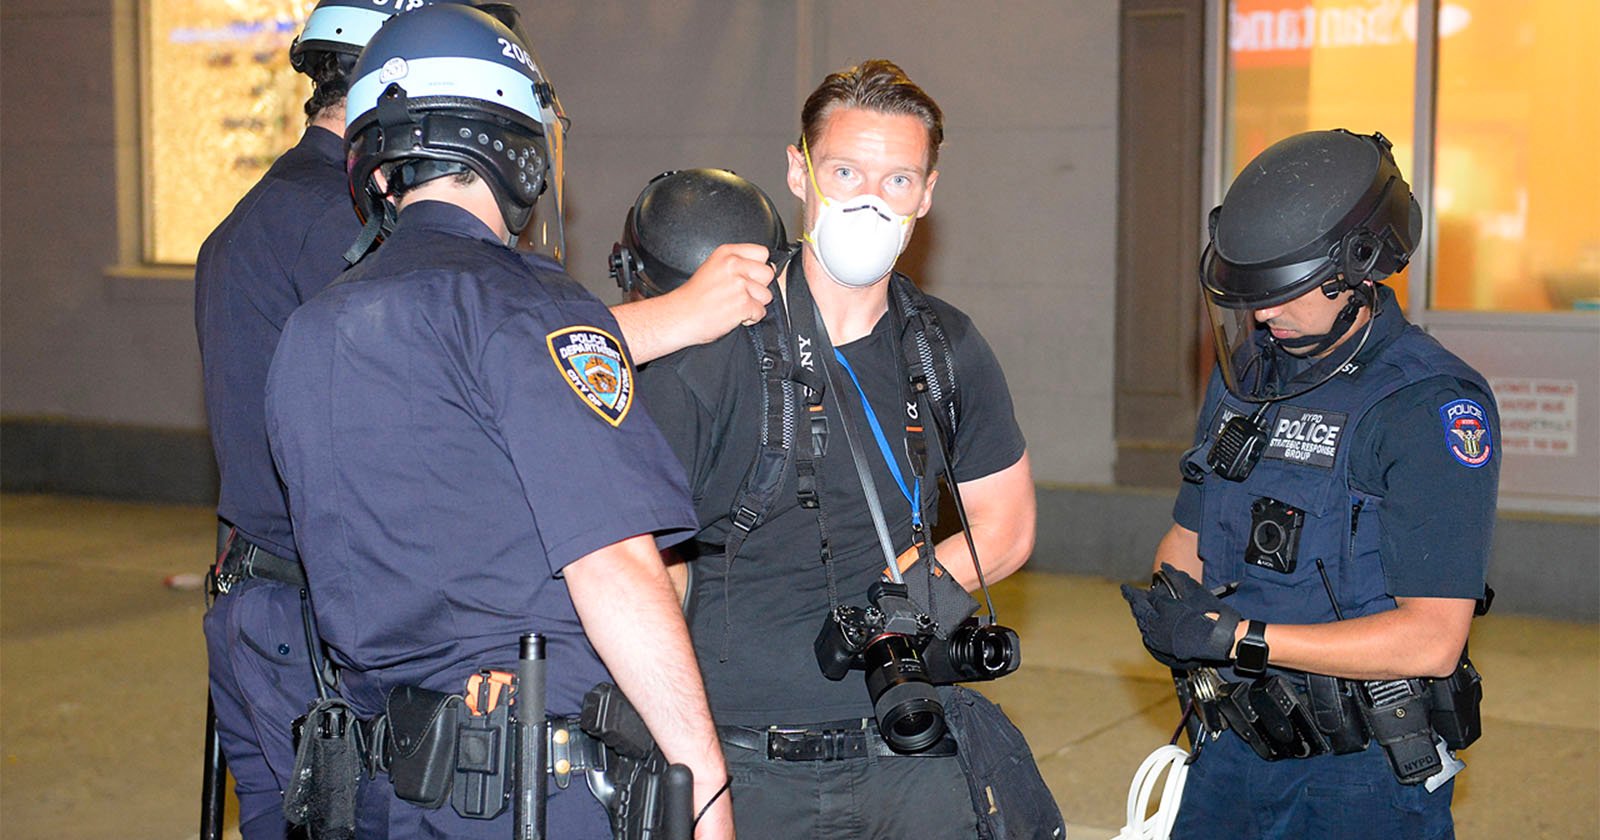 Photojournalists and NPPA Achieve Historic Settlement with the NYPD | PetaPixel